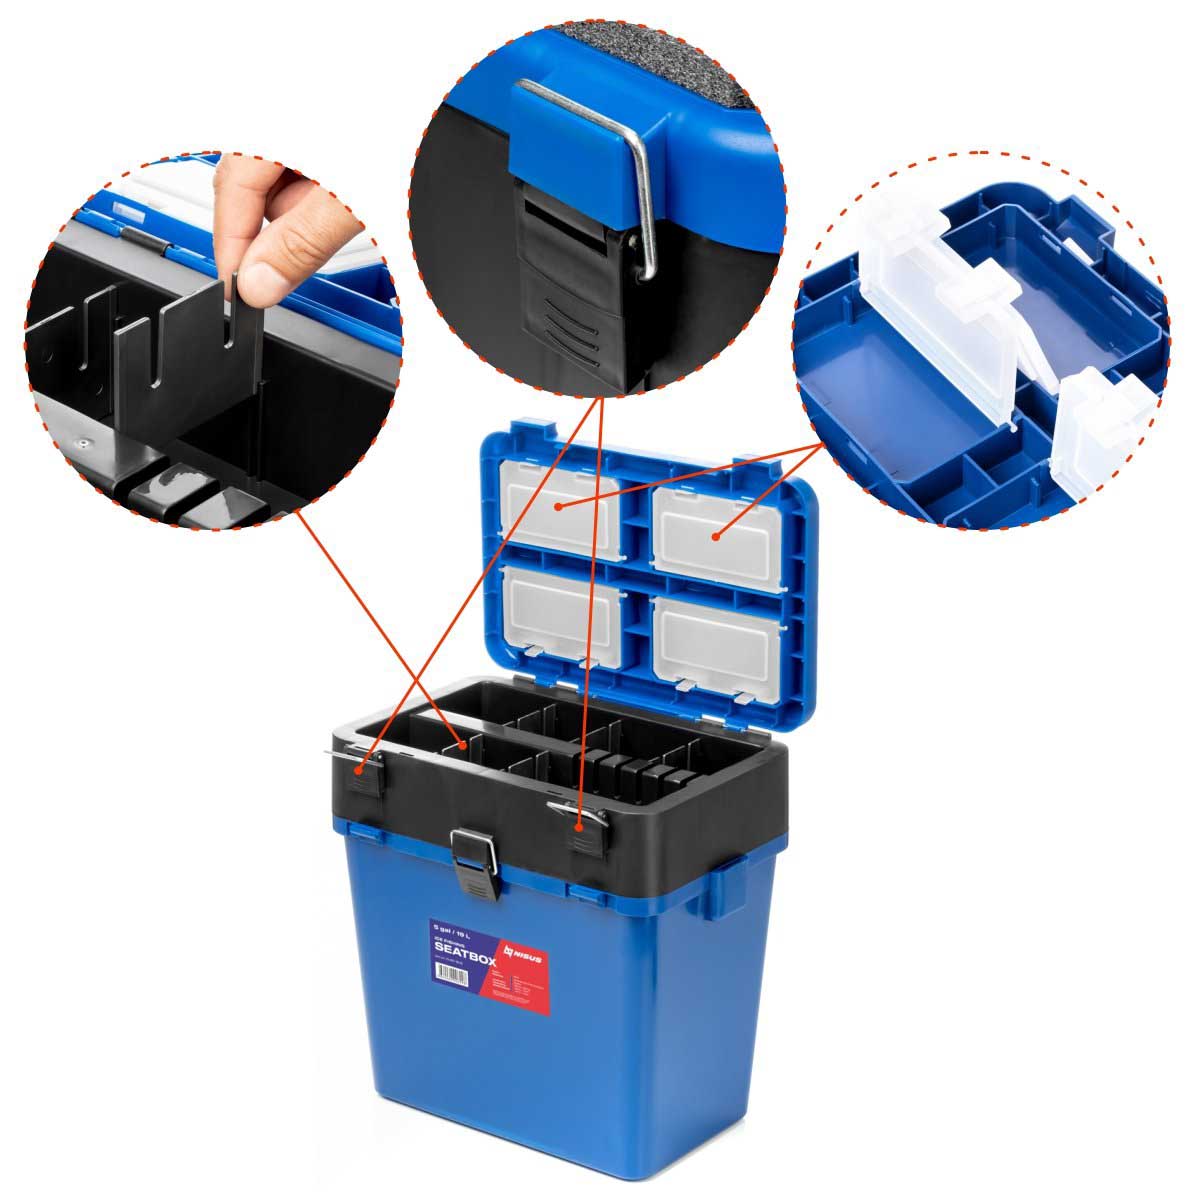 Ice Fishing Bucket Type Box with Seat and Adjustable Shoulder Strap upper compartment is equiped with plastic dividers and plastic boxes for easy storage